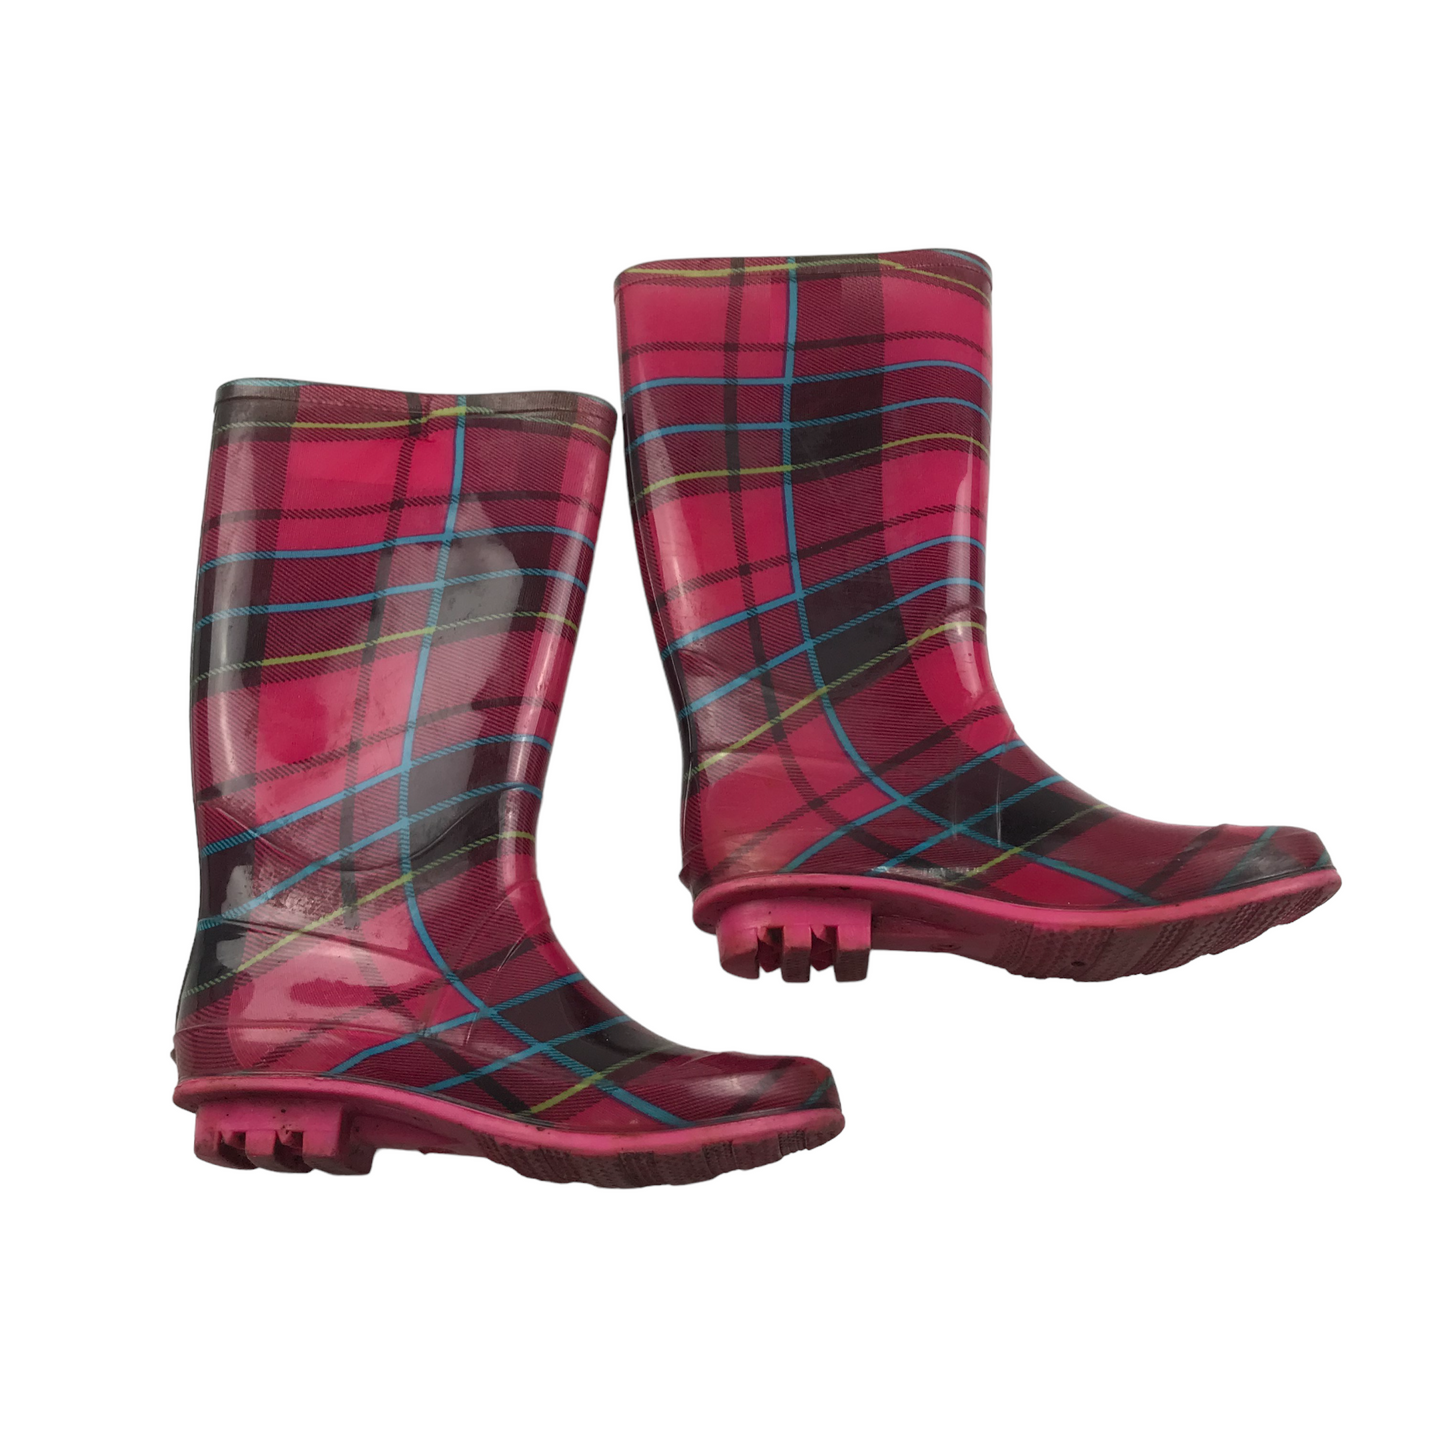 Pink Checked Calf Height Wellies Shoe Size 1